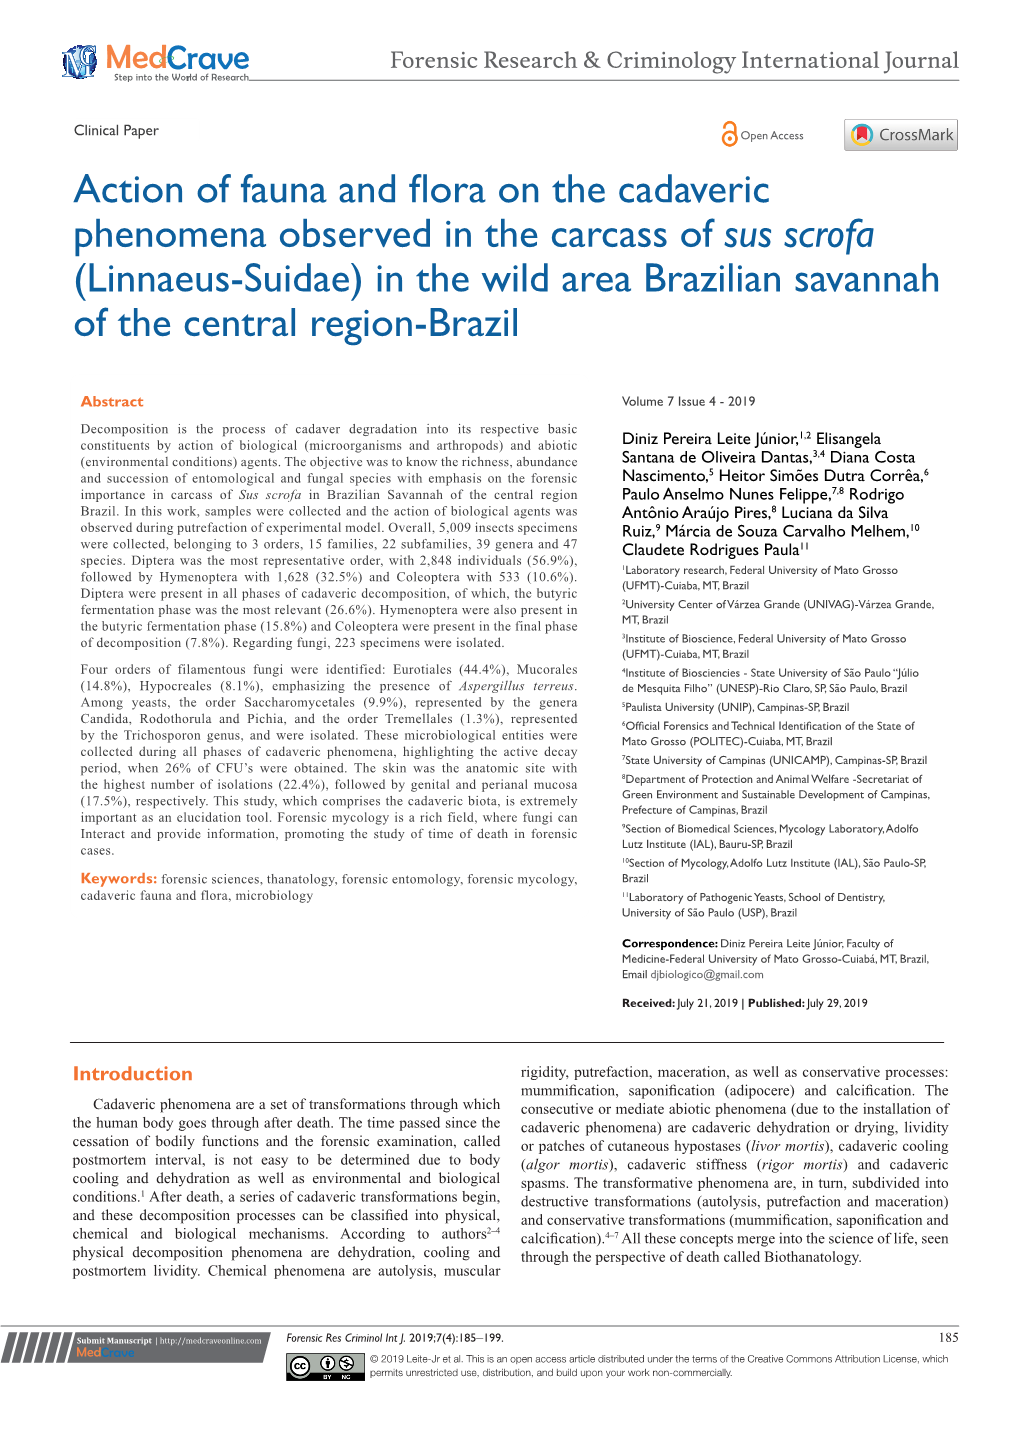 Action of Fauna and Flora on the Cadaveric Phenomena